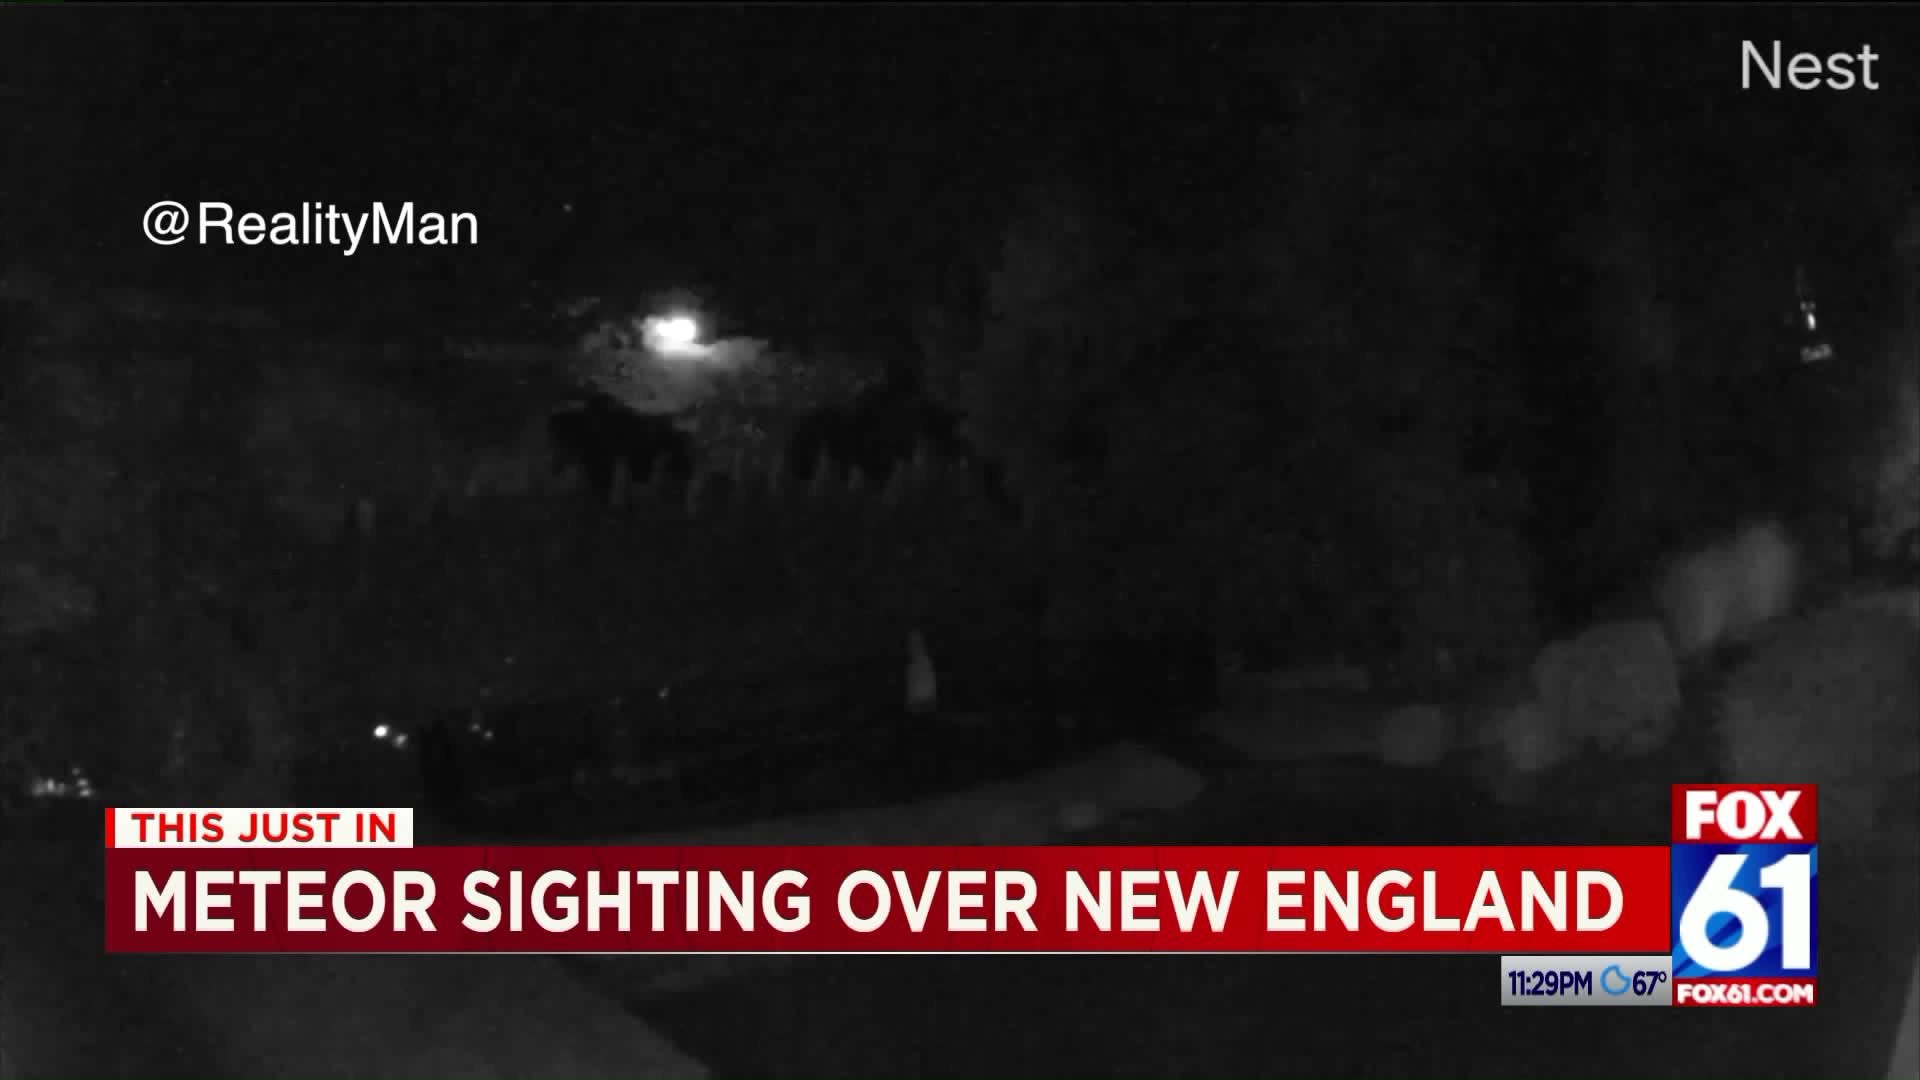 Meteor Sighting over New England